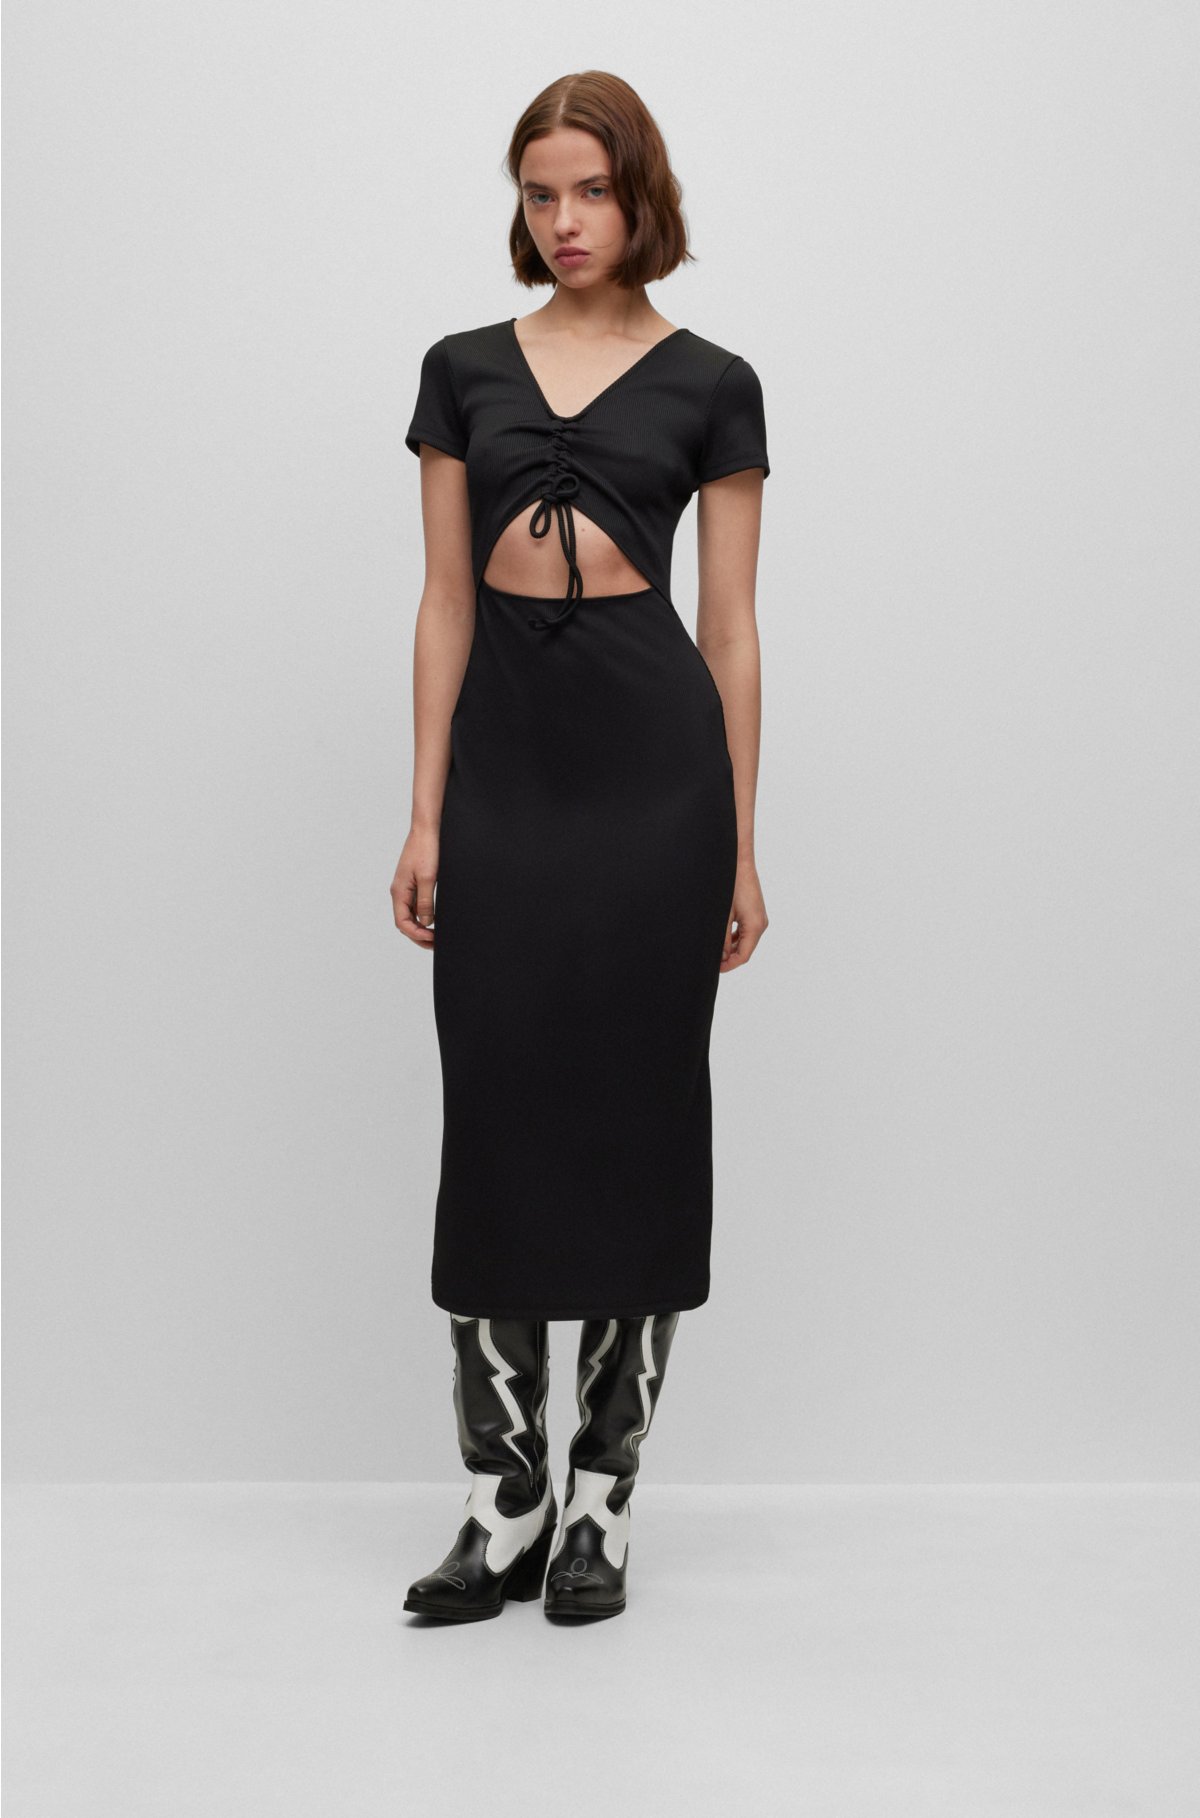 HUGO - Midi-length jersey dress with cut-out detail